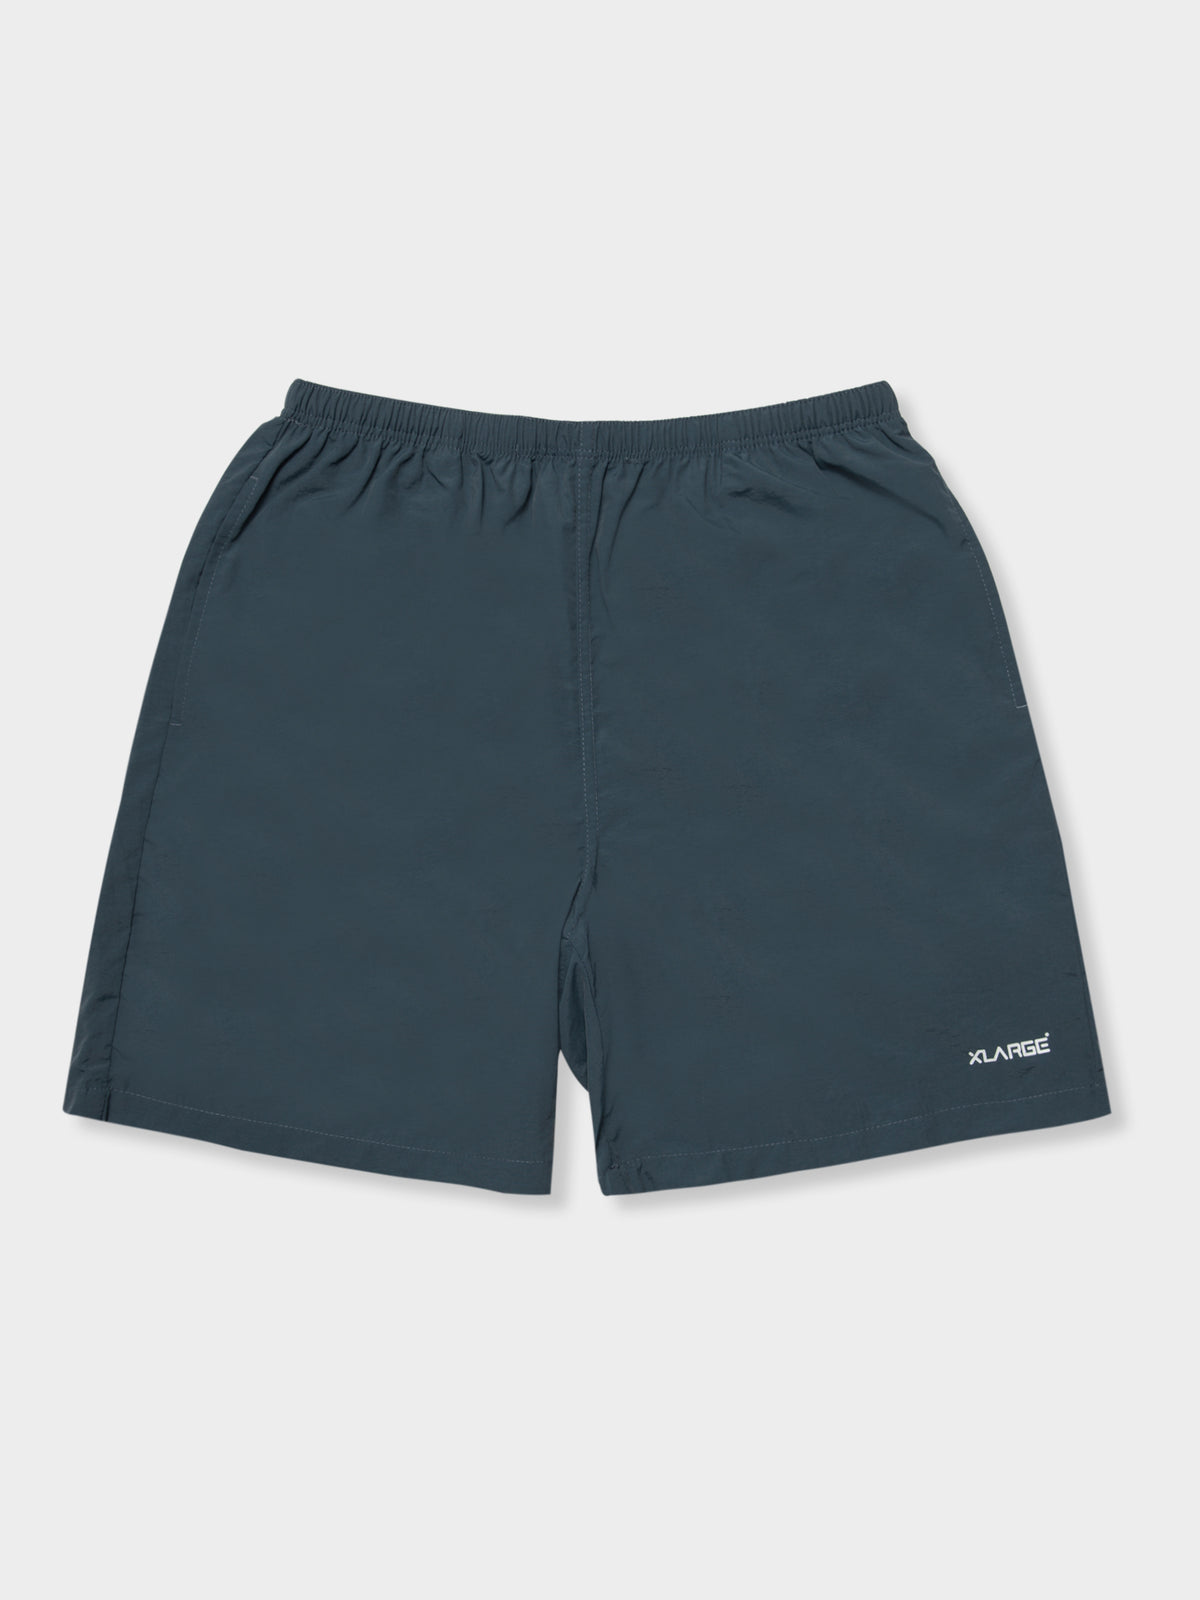 Mountain Shorts in Navy Blue